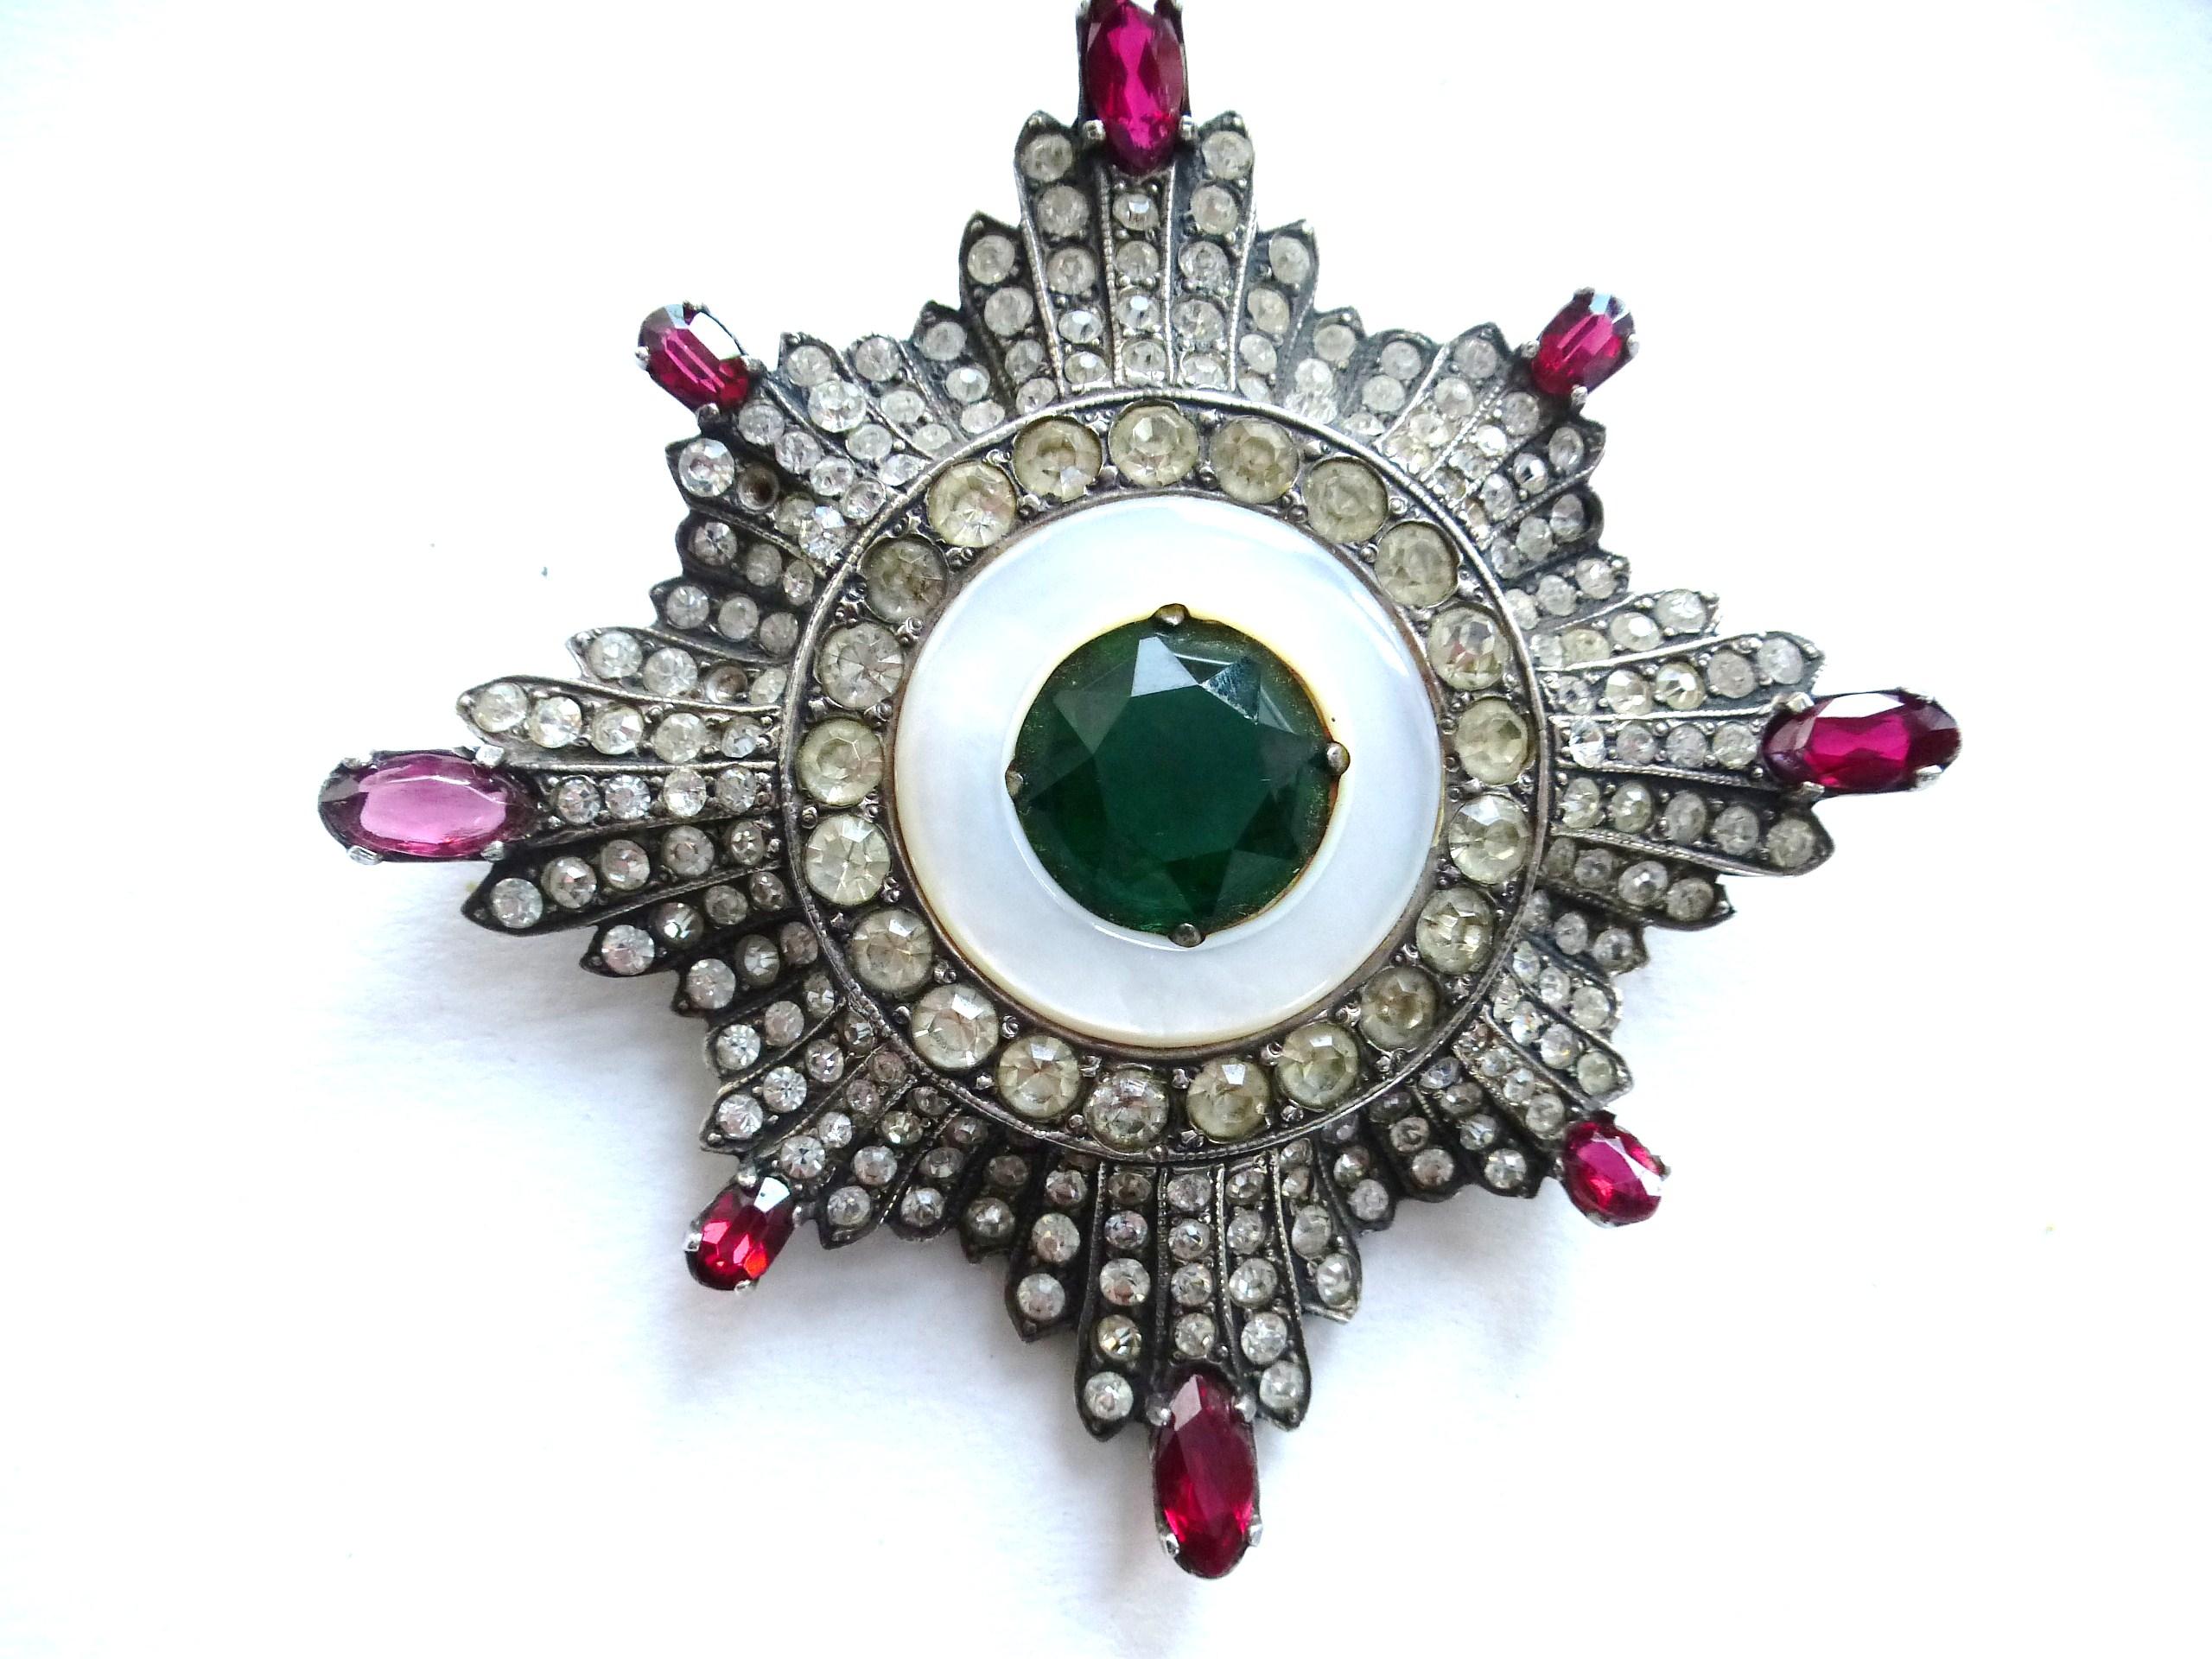 A very early star brooch completely filled with many different large cut rhinestones. The stones get bigger towards the inside, then a mother-of-pearl ring surrounds a large, cut green rhinestone. the outer tips are adorned with red rectangular